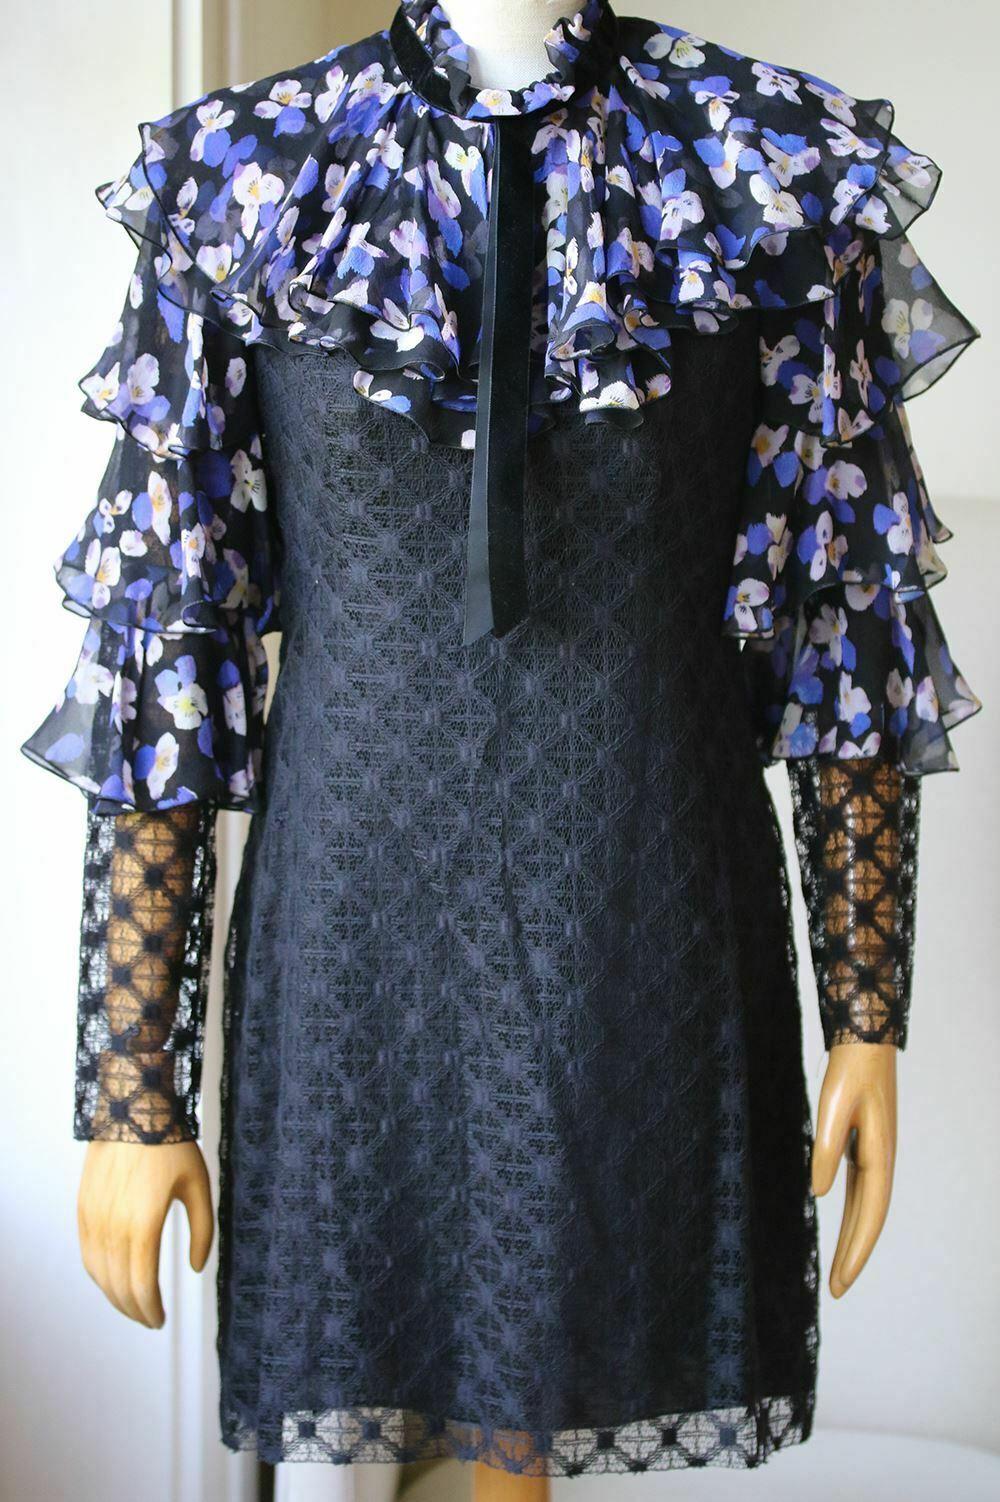 This Philosophy Di Lorenzo Serafini Printed Bib Mini Dress Features A Tiered Ruffles Along The Sleeve And Ruffle Mock Neck. Tiered Ruffles Along The Sleeve. Ruffle Mock Neck. Fully Lined. 100% Silk.

Size: UK 6 (US 2, FR 34, IT 38)

Condition: New